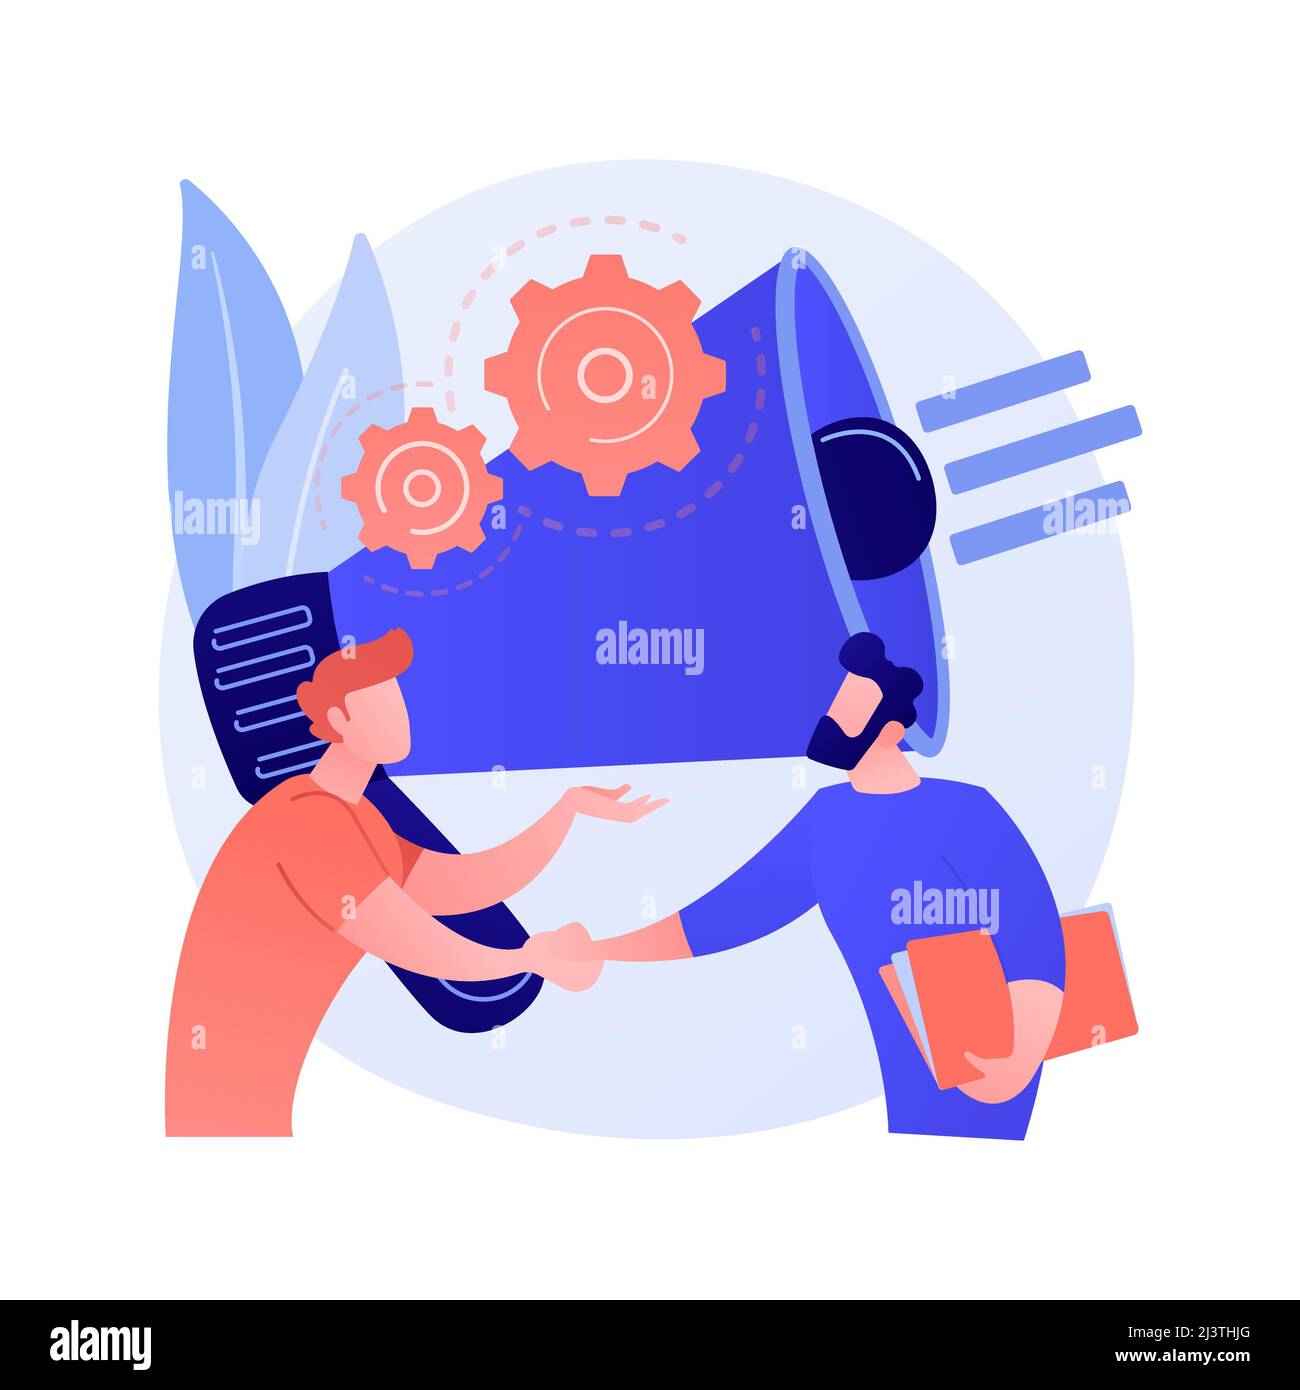 Relationship marketing abstract concept vector illustration. Customer relationship strategy, focus on consumer loyalty, brand interaction and long-ter Stock Vector